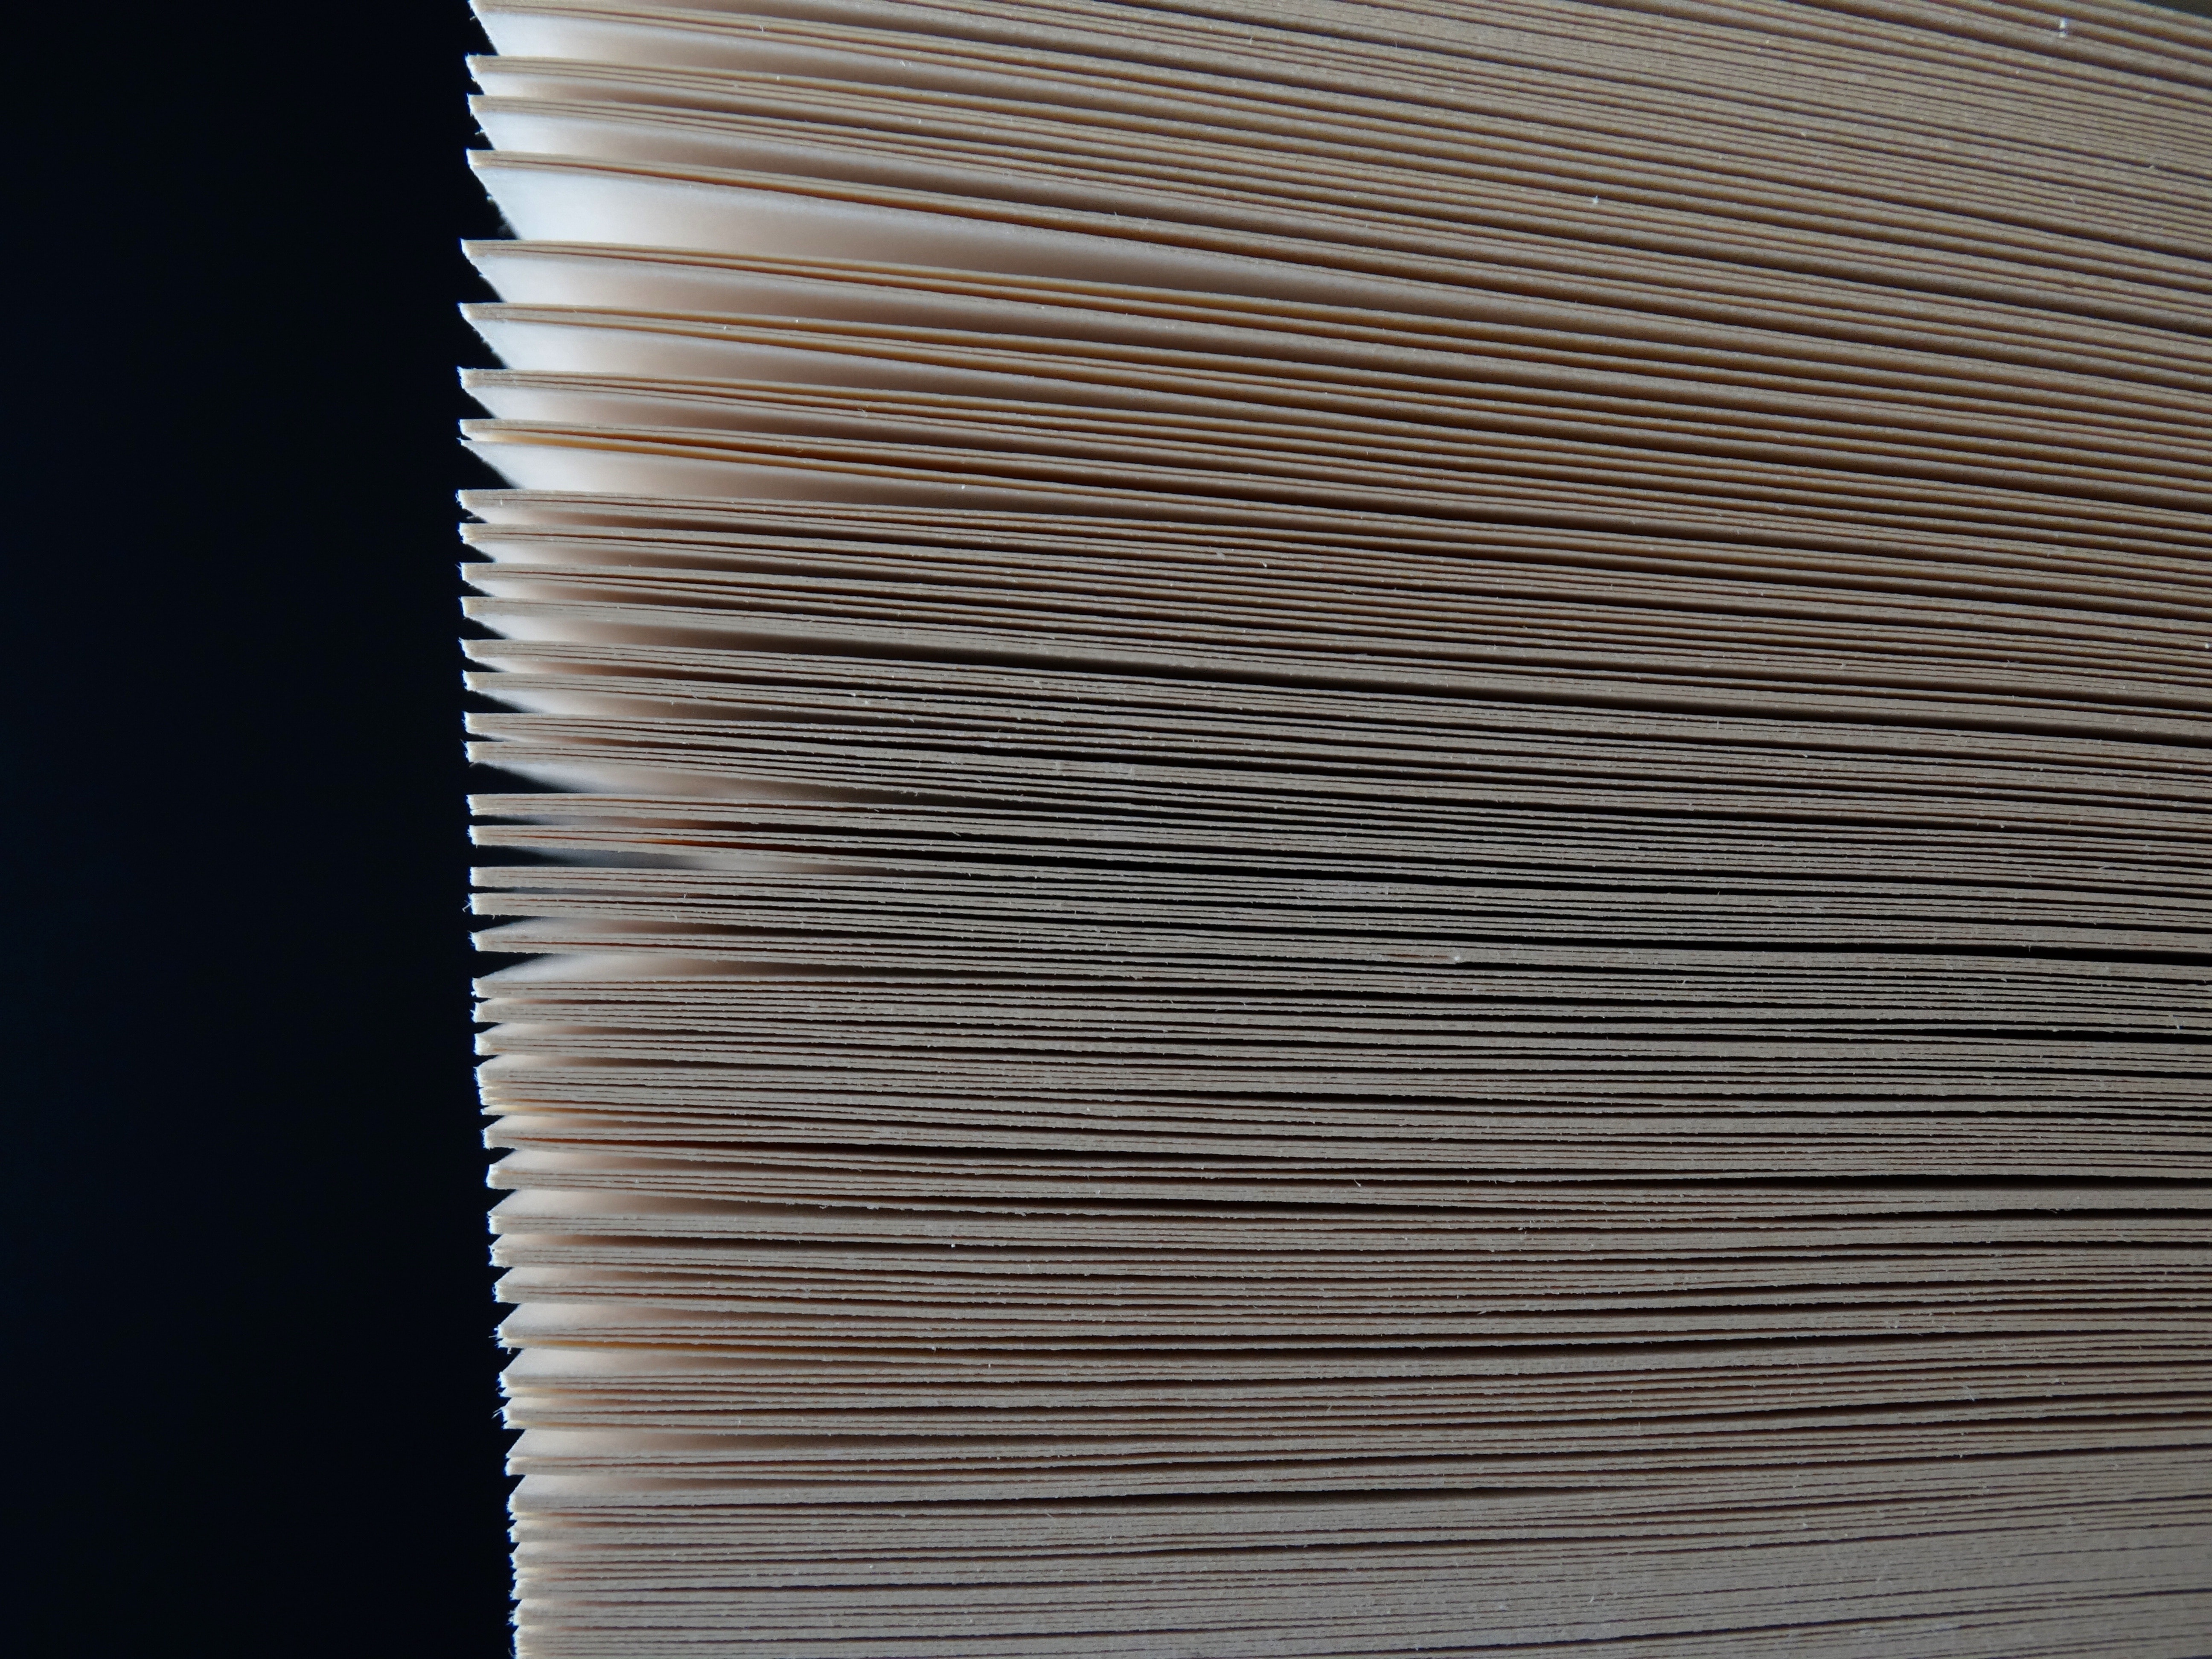 timelapse photo of book paper